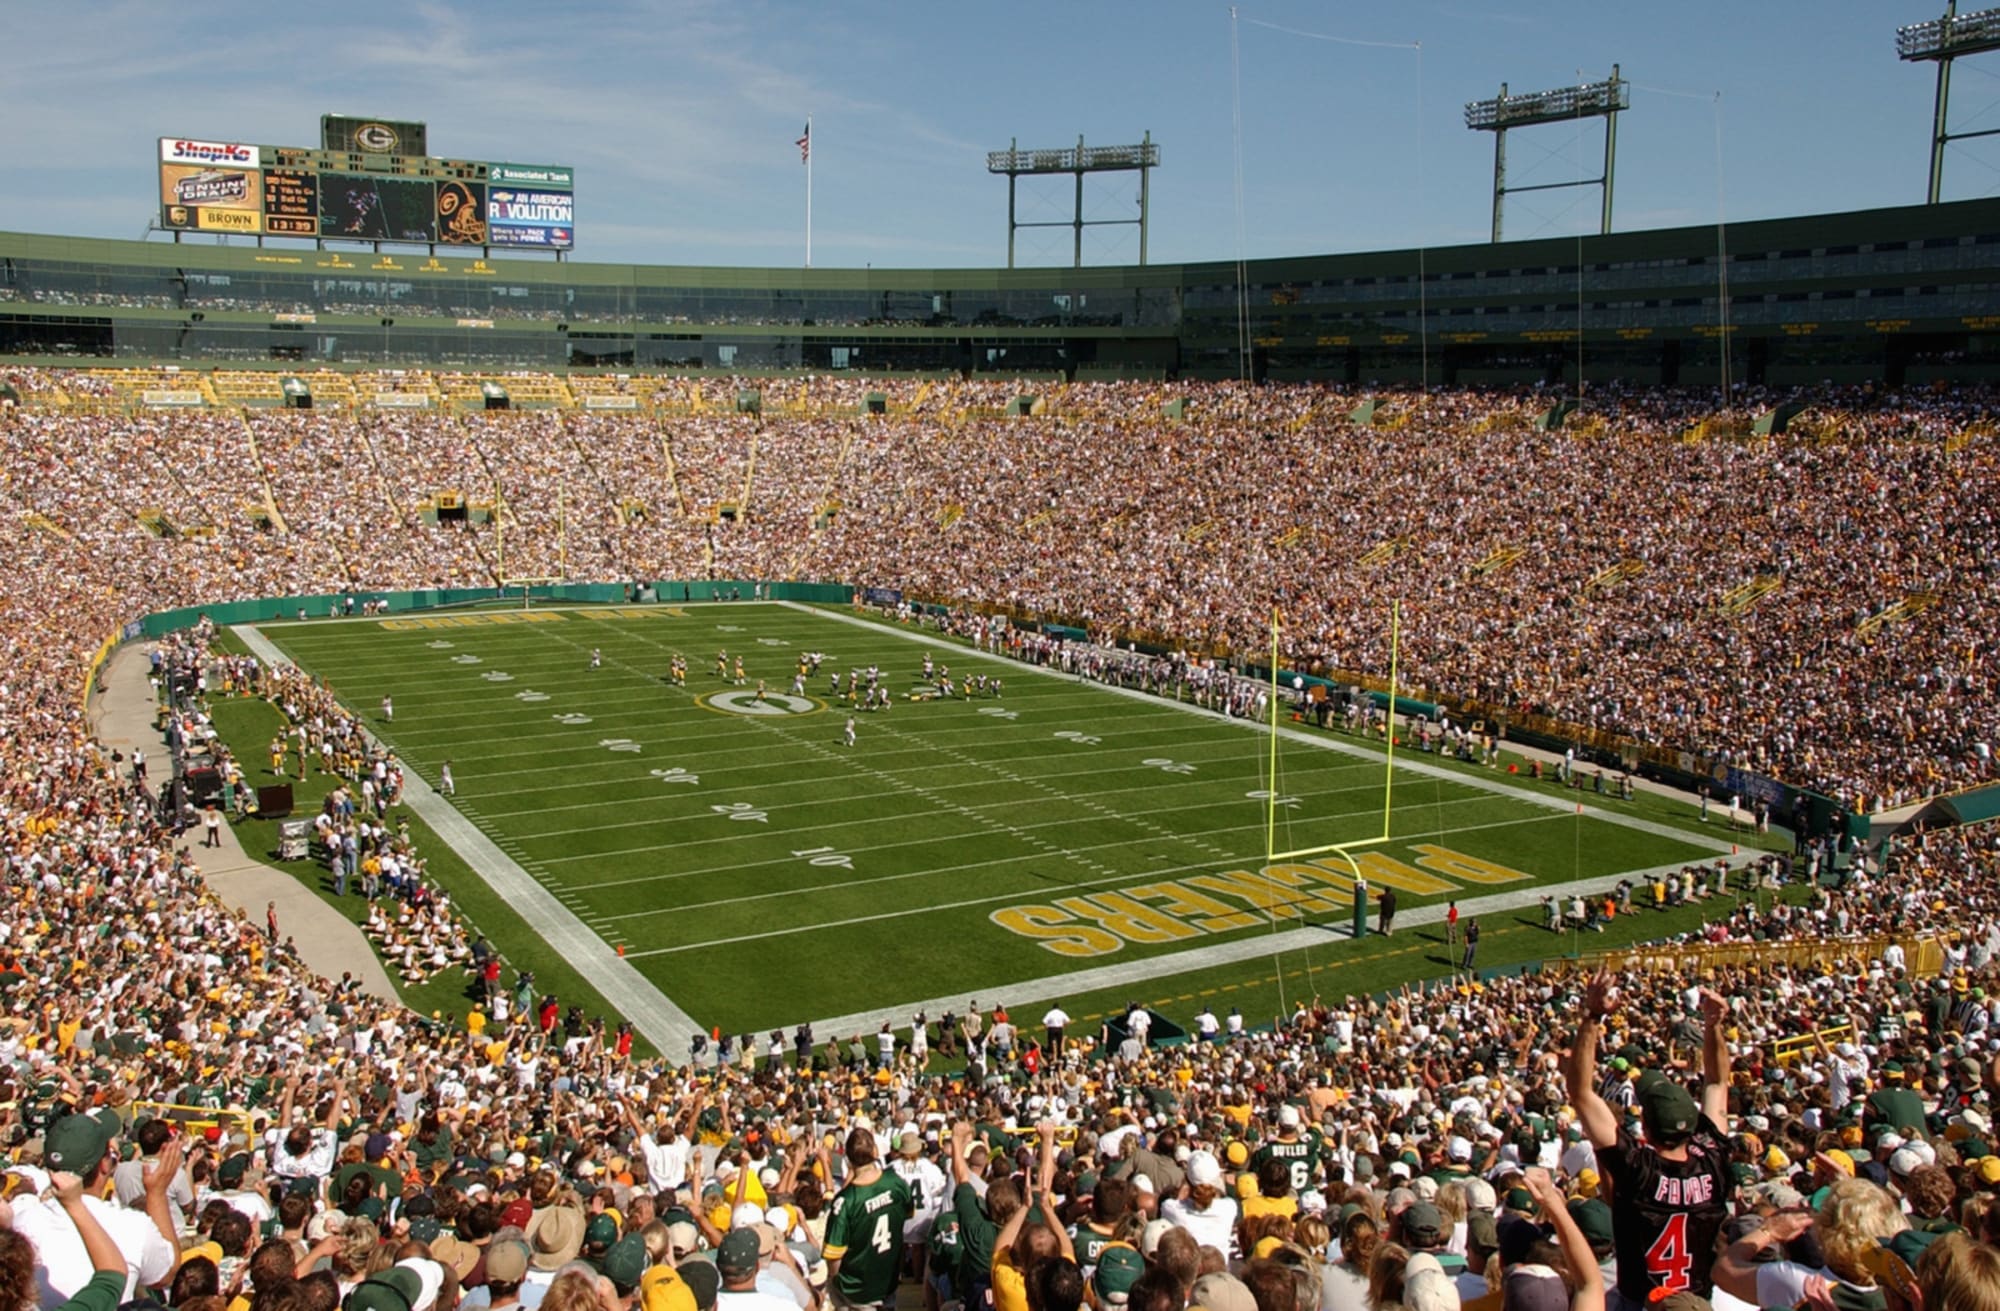 Green Bay may never get a Super Bowl, but was awarded next-best thing